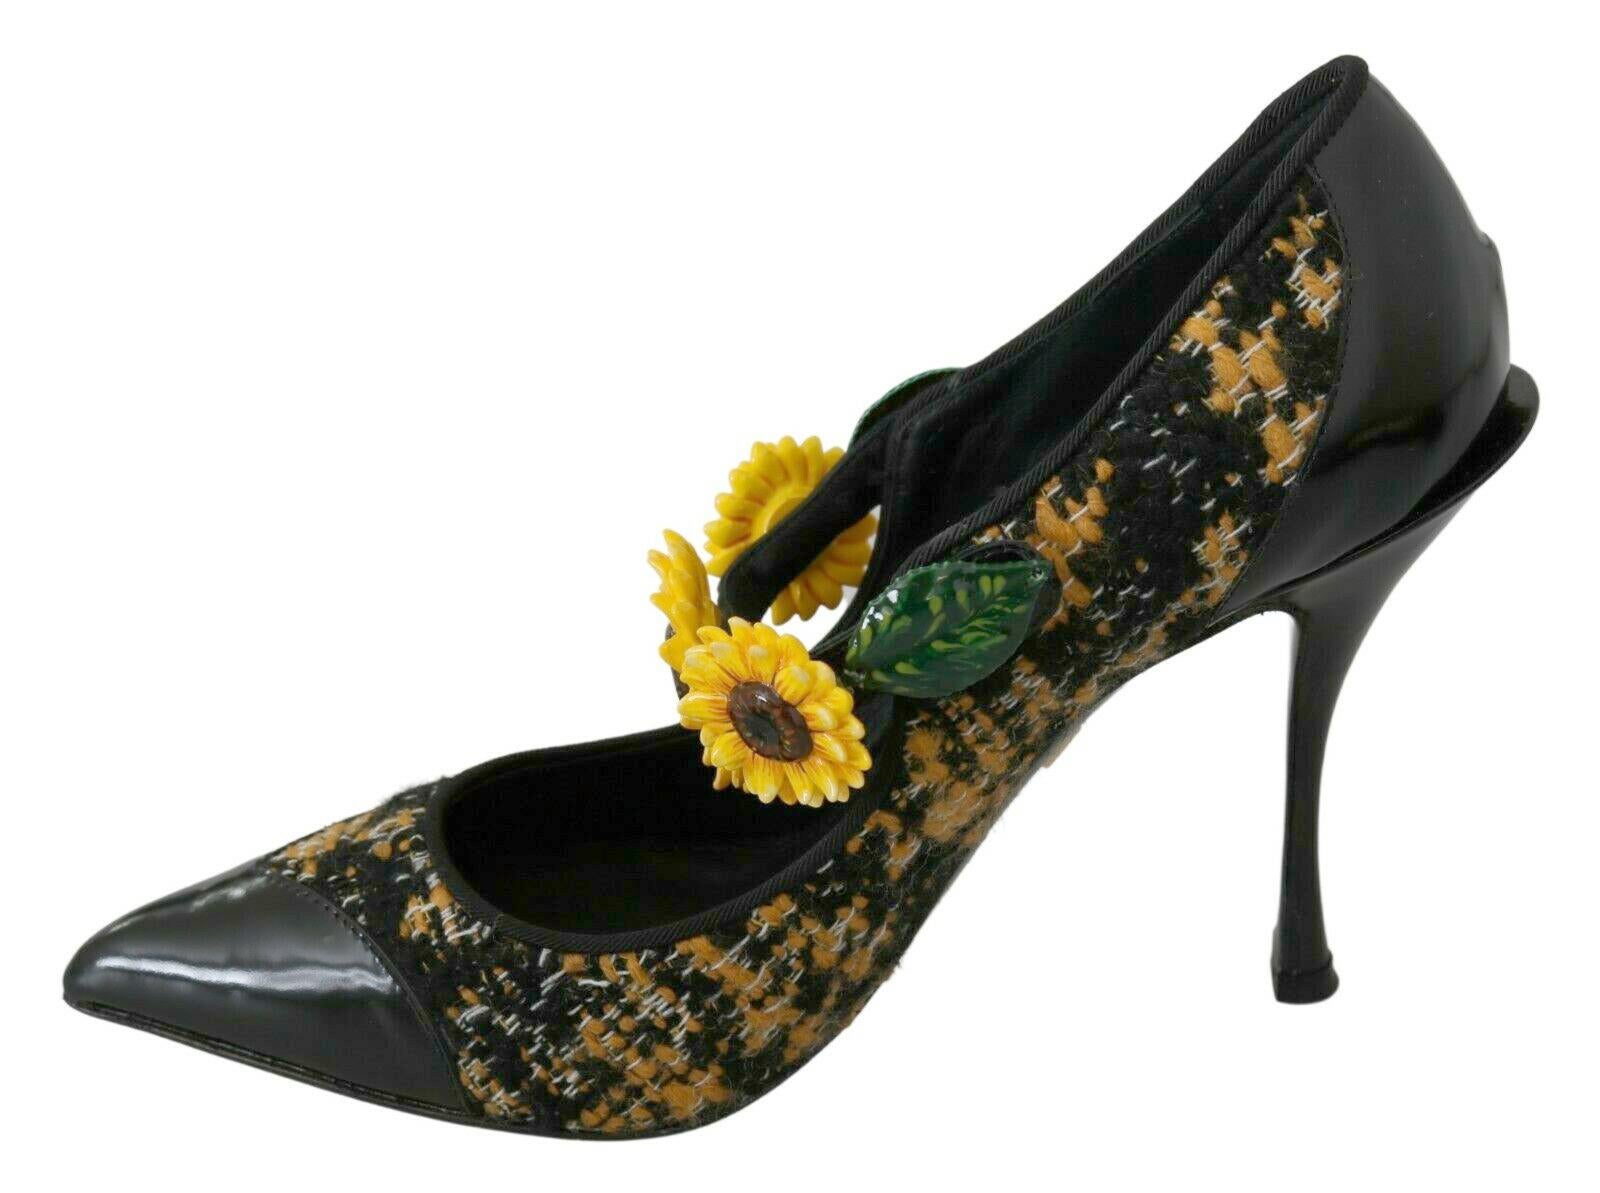  Gorgeous, brand new with tags 100% Authentic Dolce & Gabbana pumps.




Modell: Mary Janes pumps

Color: Black and yellow

Material: Boucle and leather

Sole: Leather
Daisy floral detailing

Logo details

Very high quality and comfort

Made in